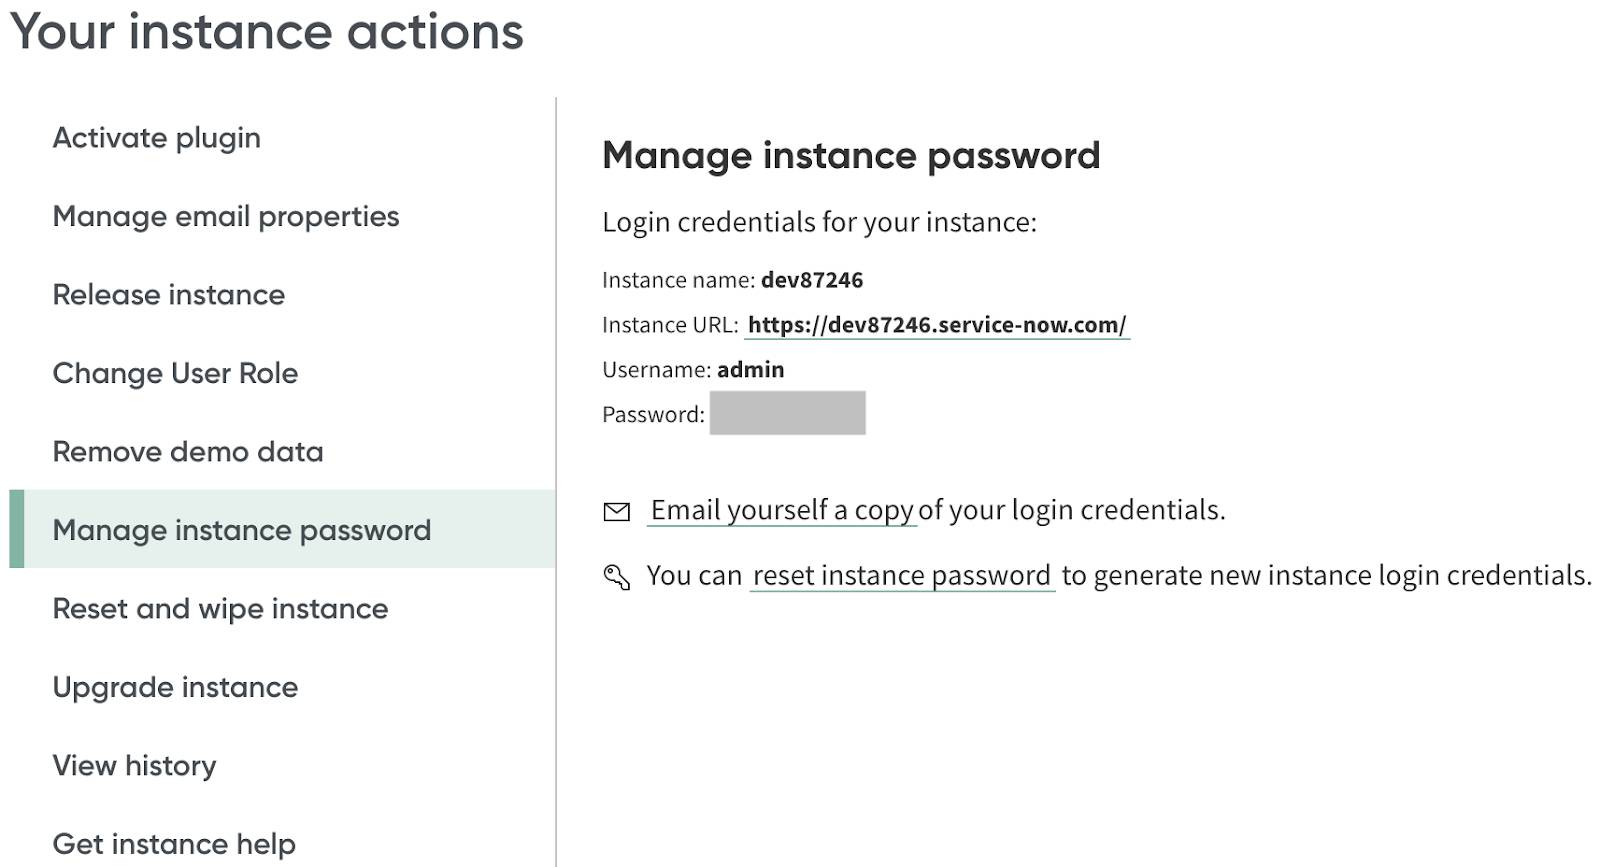 ServiceNow manage instance password action with login credentials.